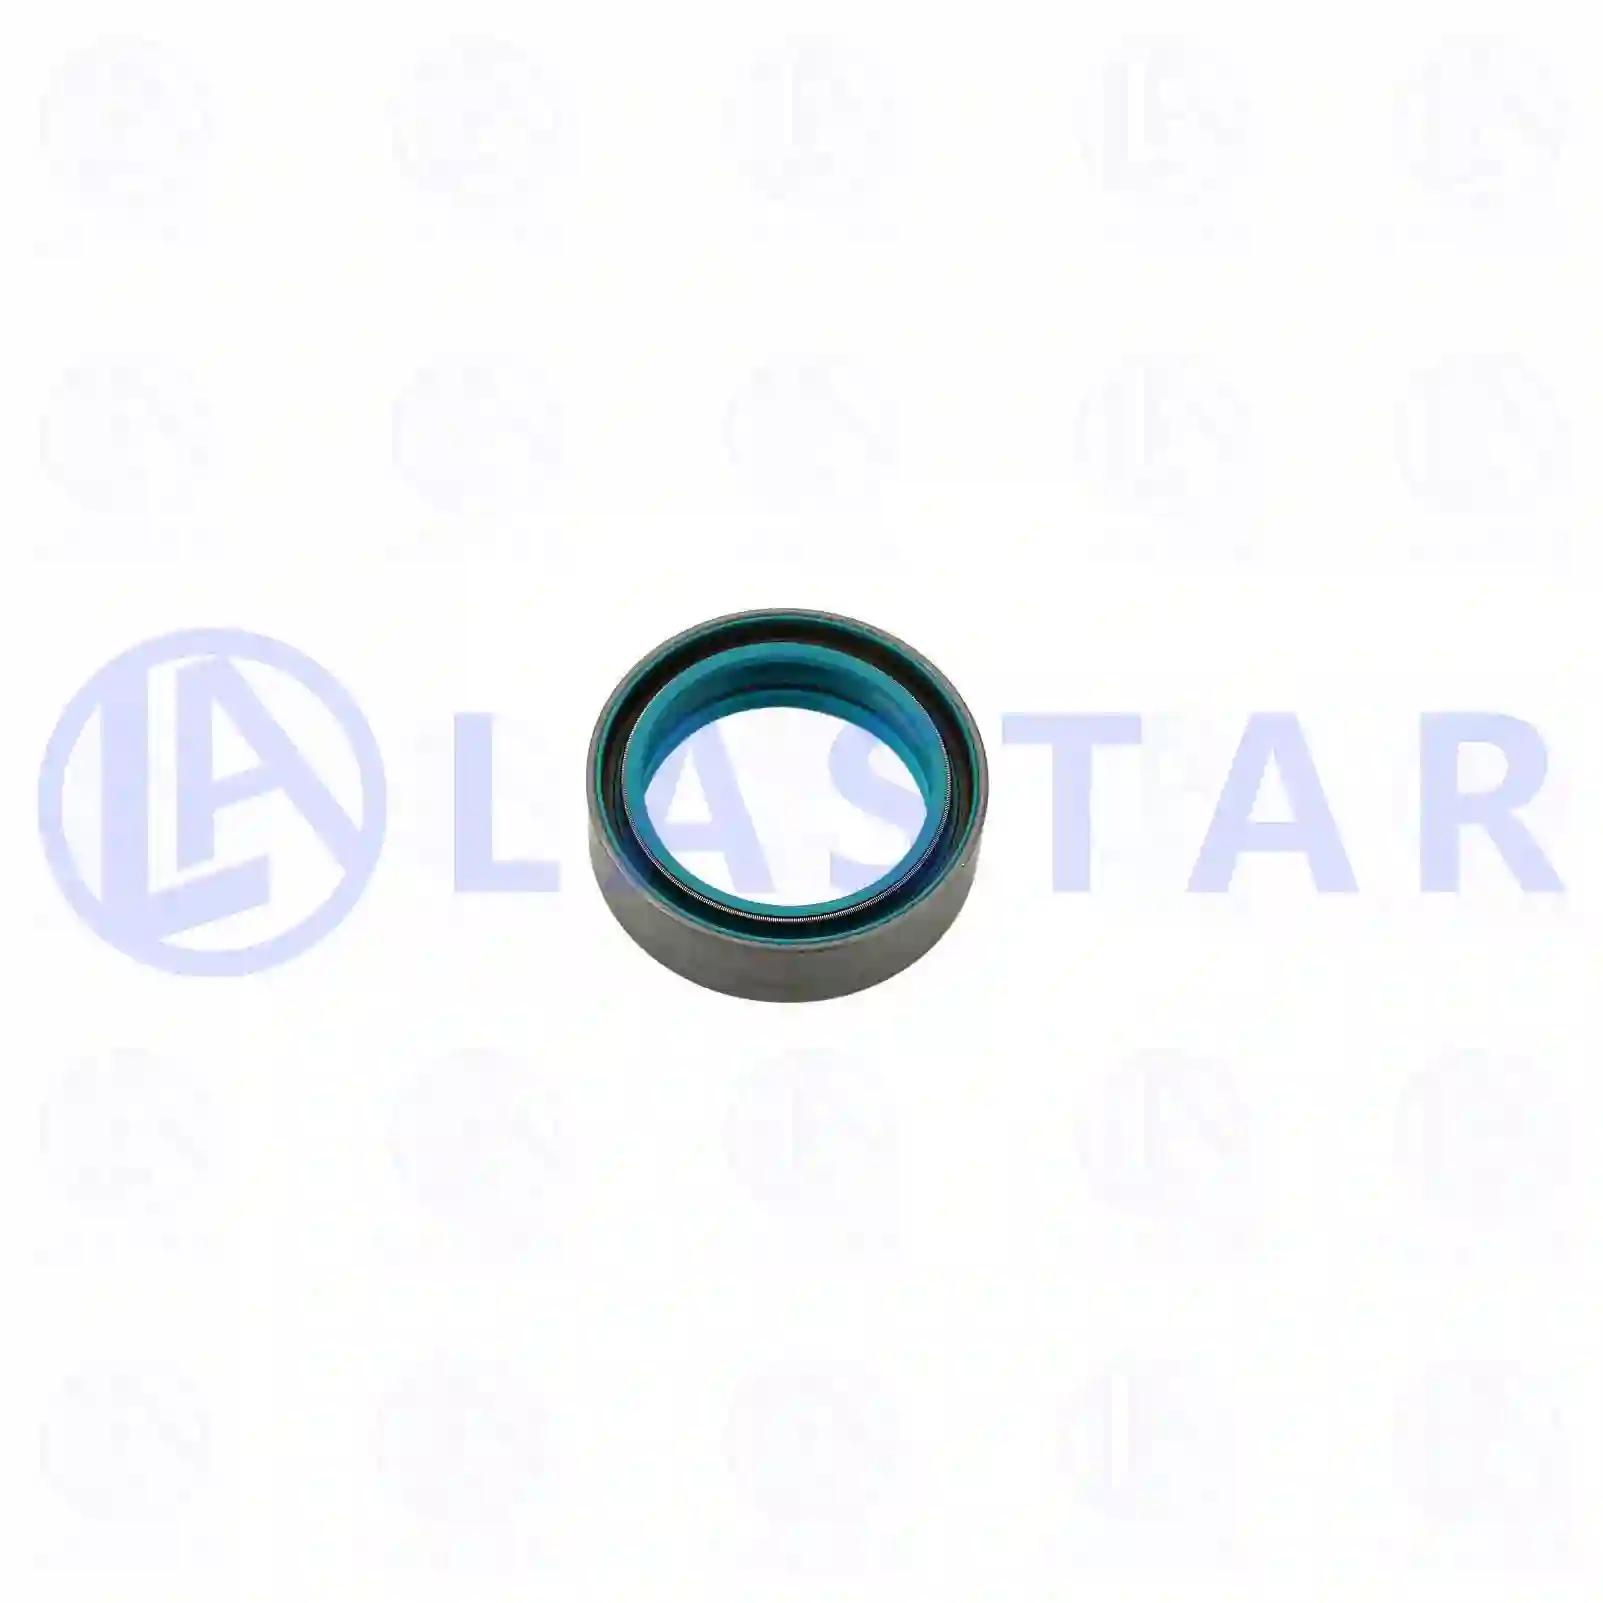 Oil seal, 77730884, 1524412, , ||  77730884 Lastar Spare Part | Truck Spare Parts, Auotomotive Spare Parts Oil seal, 77730884, 1524412, , ||  77730884 Lastar Spare Part | Truck Spare Parts, Auotomotive Spare Parts